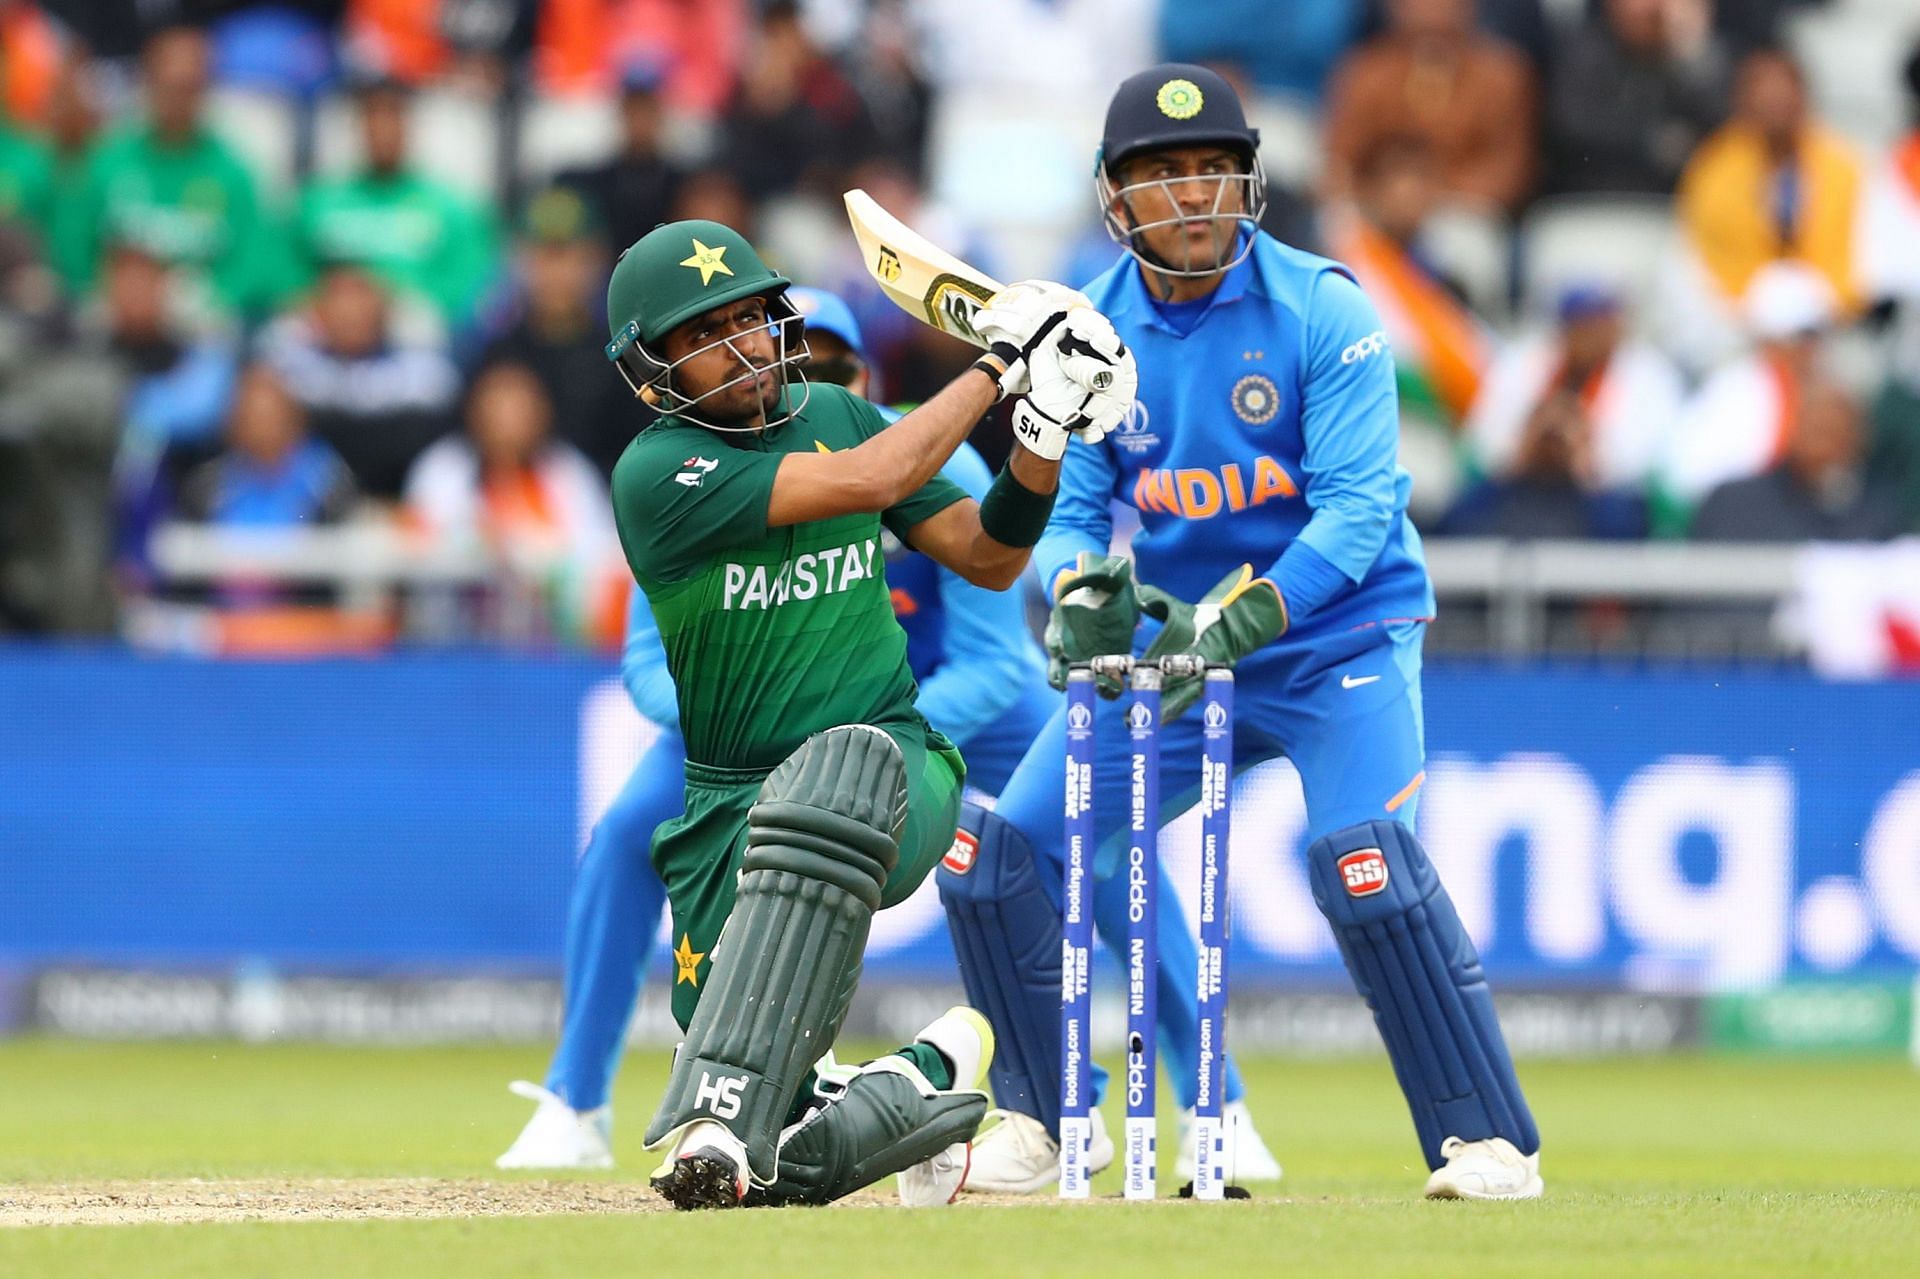 The Pakistan batter in action during the 2019 World Cup match against India. (Pic: Getty Images)